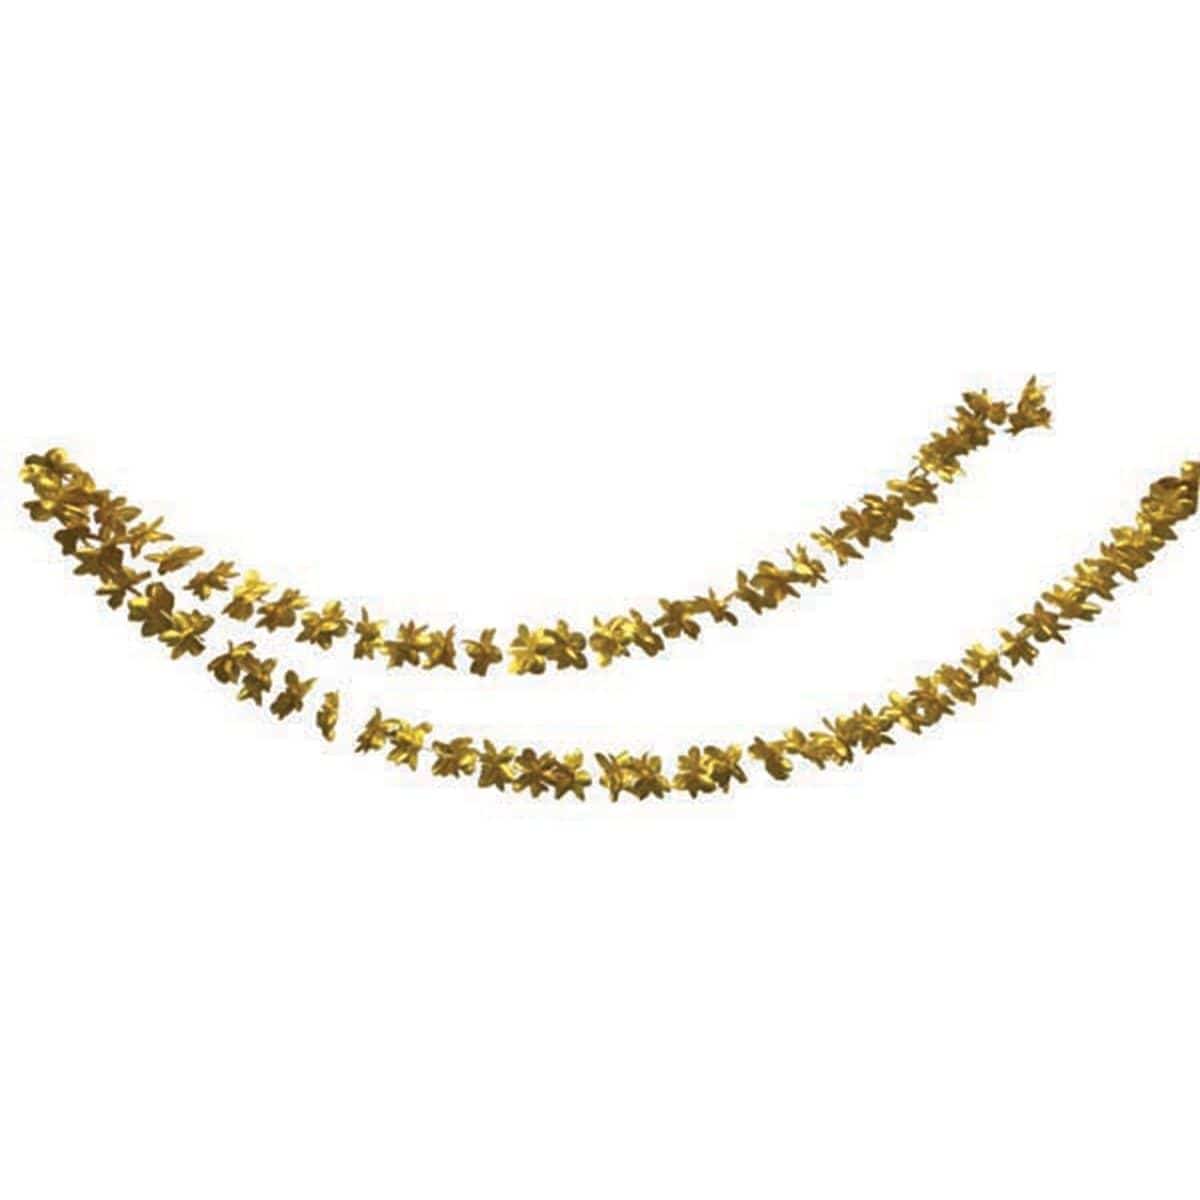 Buy Theme Party Gold Flower Luau Garland sold at Party Expert